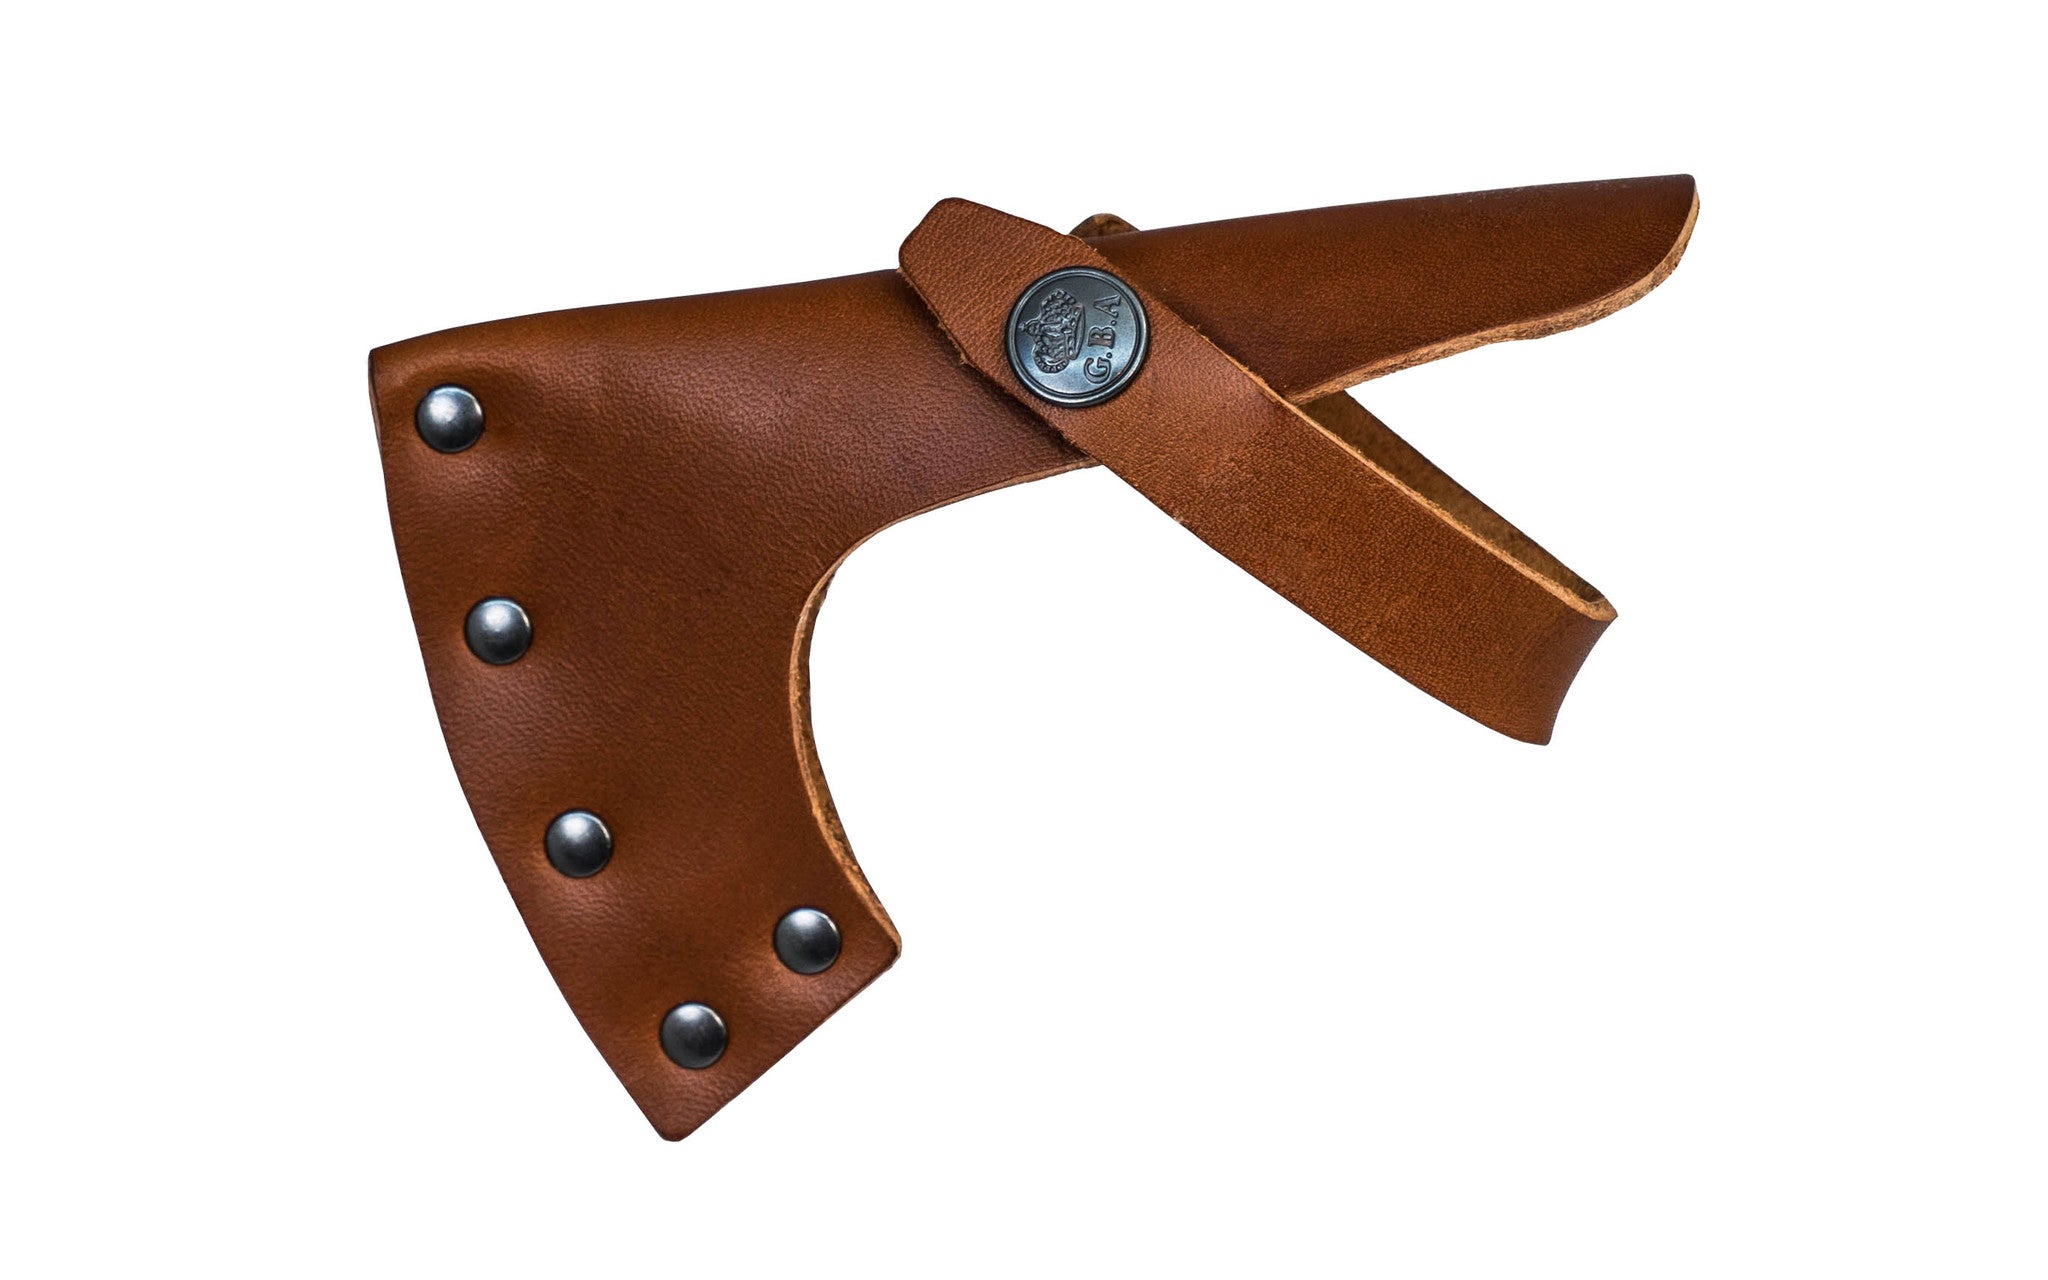 Leather Sheath for Gransfors Bruk Outdoor Axe with Collar Guard No. 425